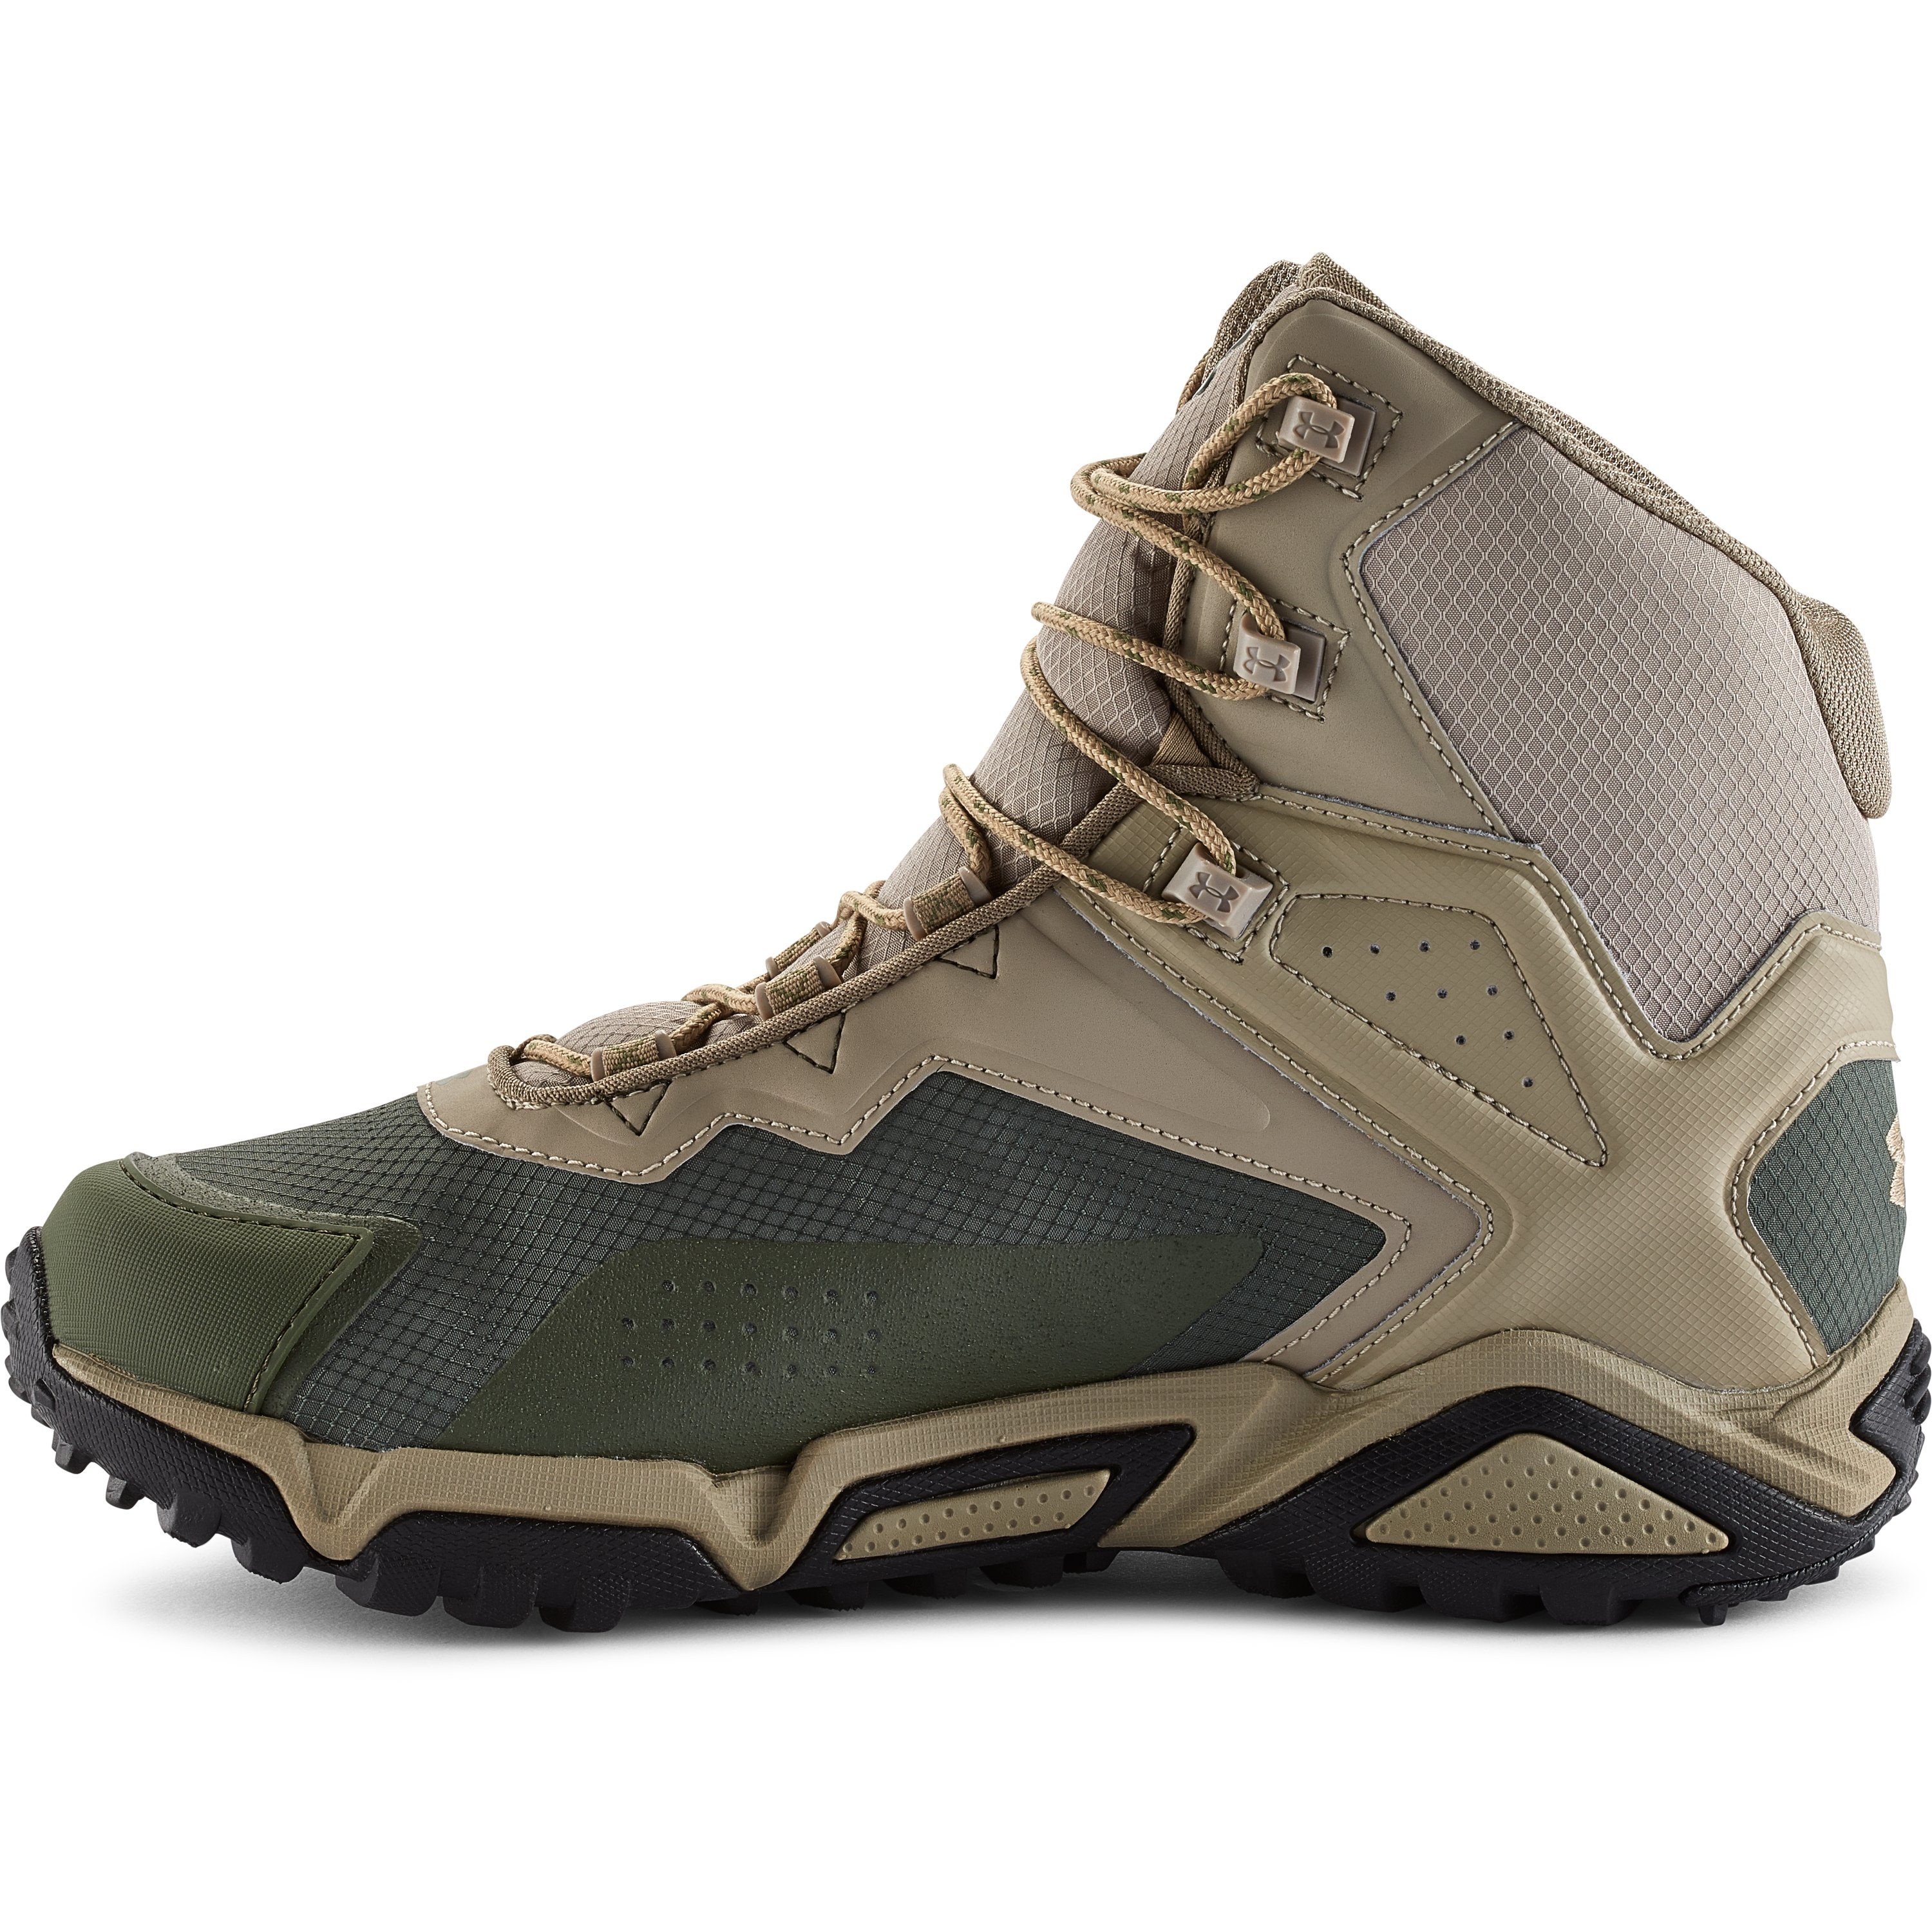 Under Armour Men's Ua Tabor Boots Luxembourg, SAVE 50% -